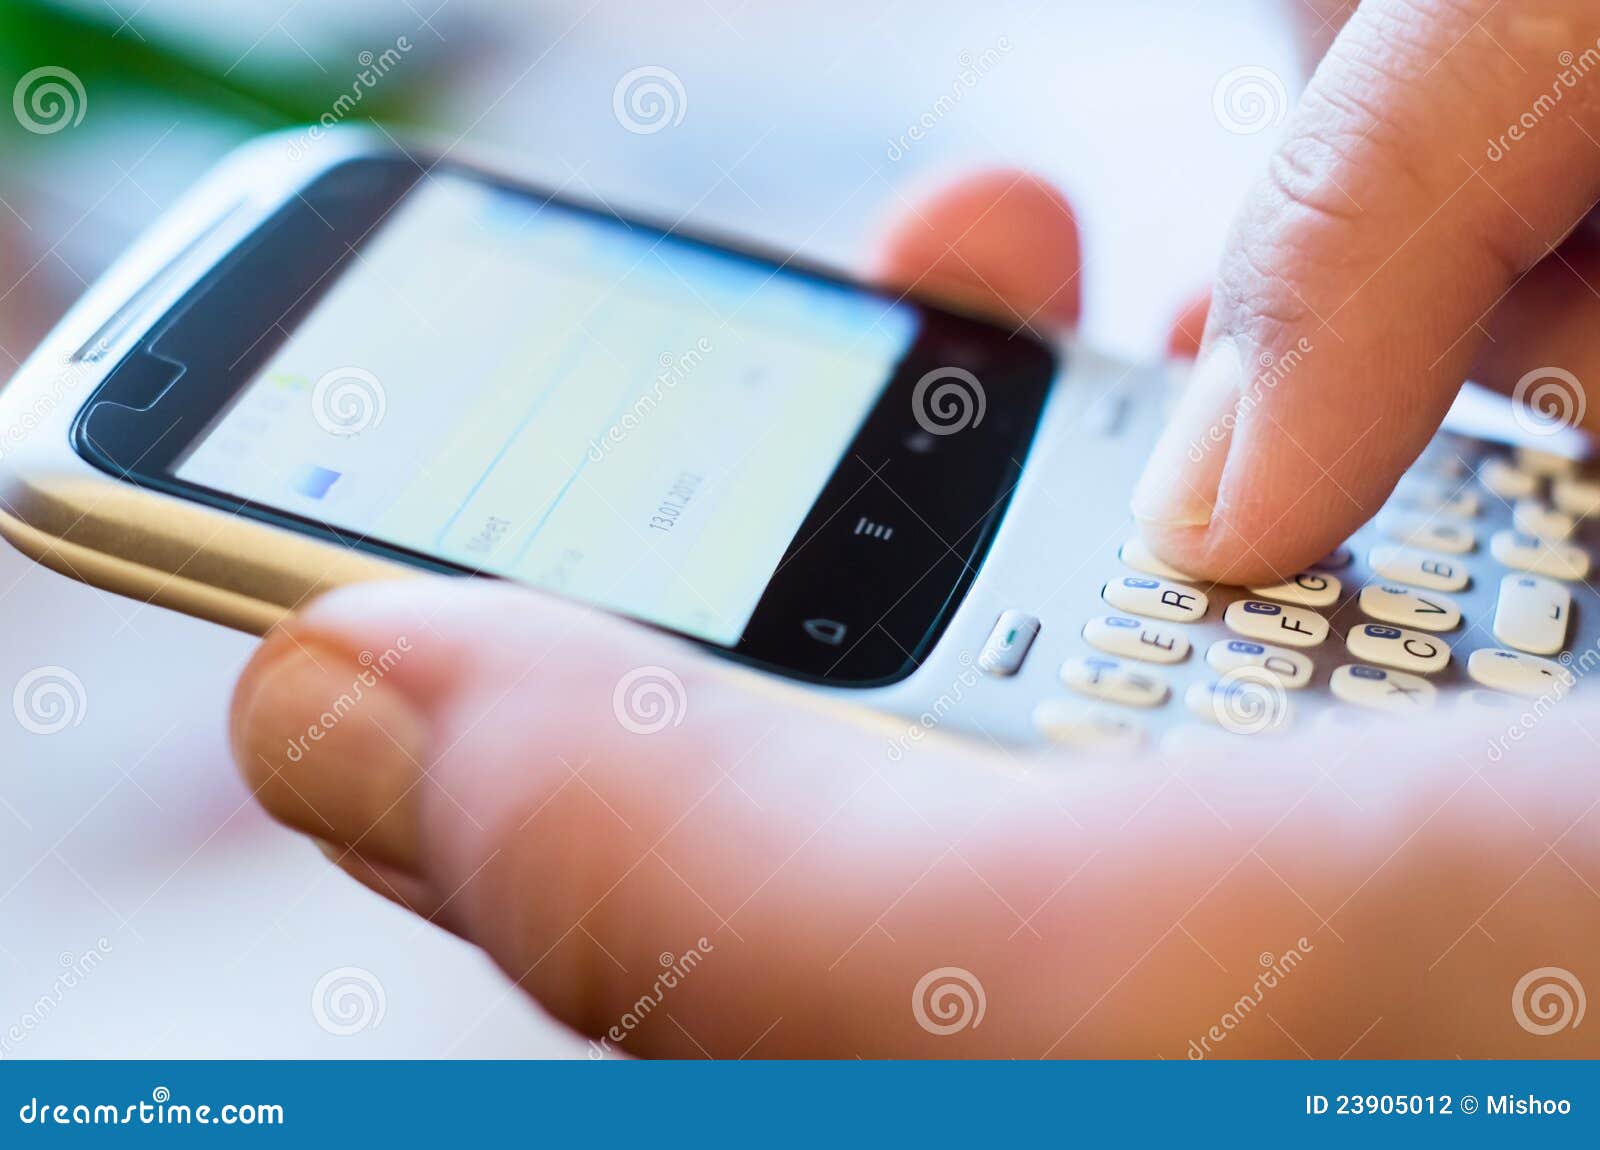 finger on qwerty smartphone